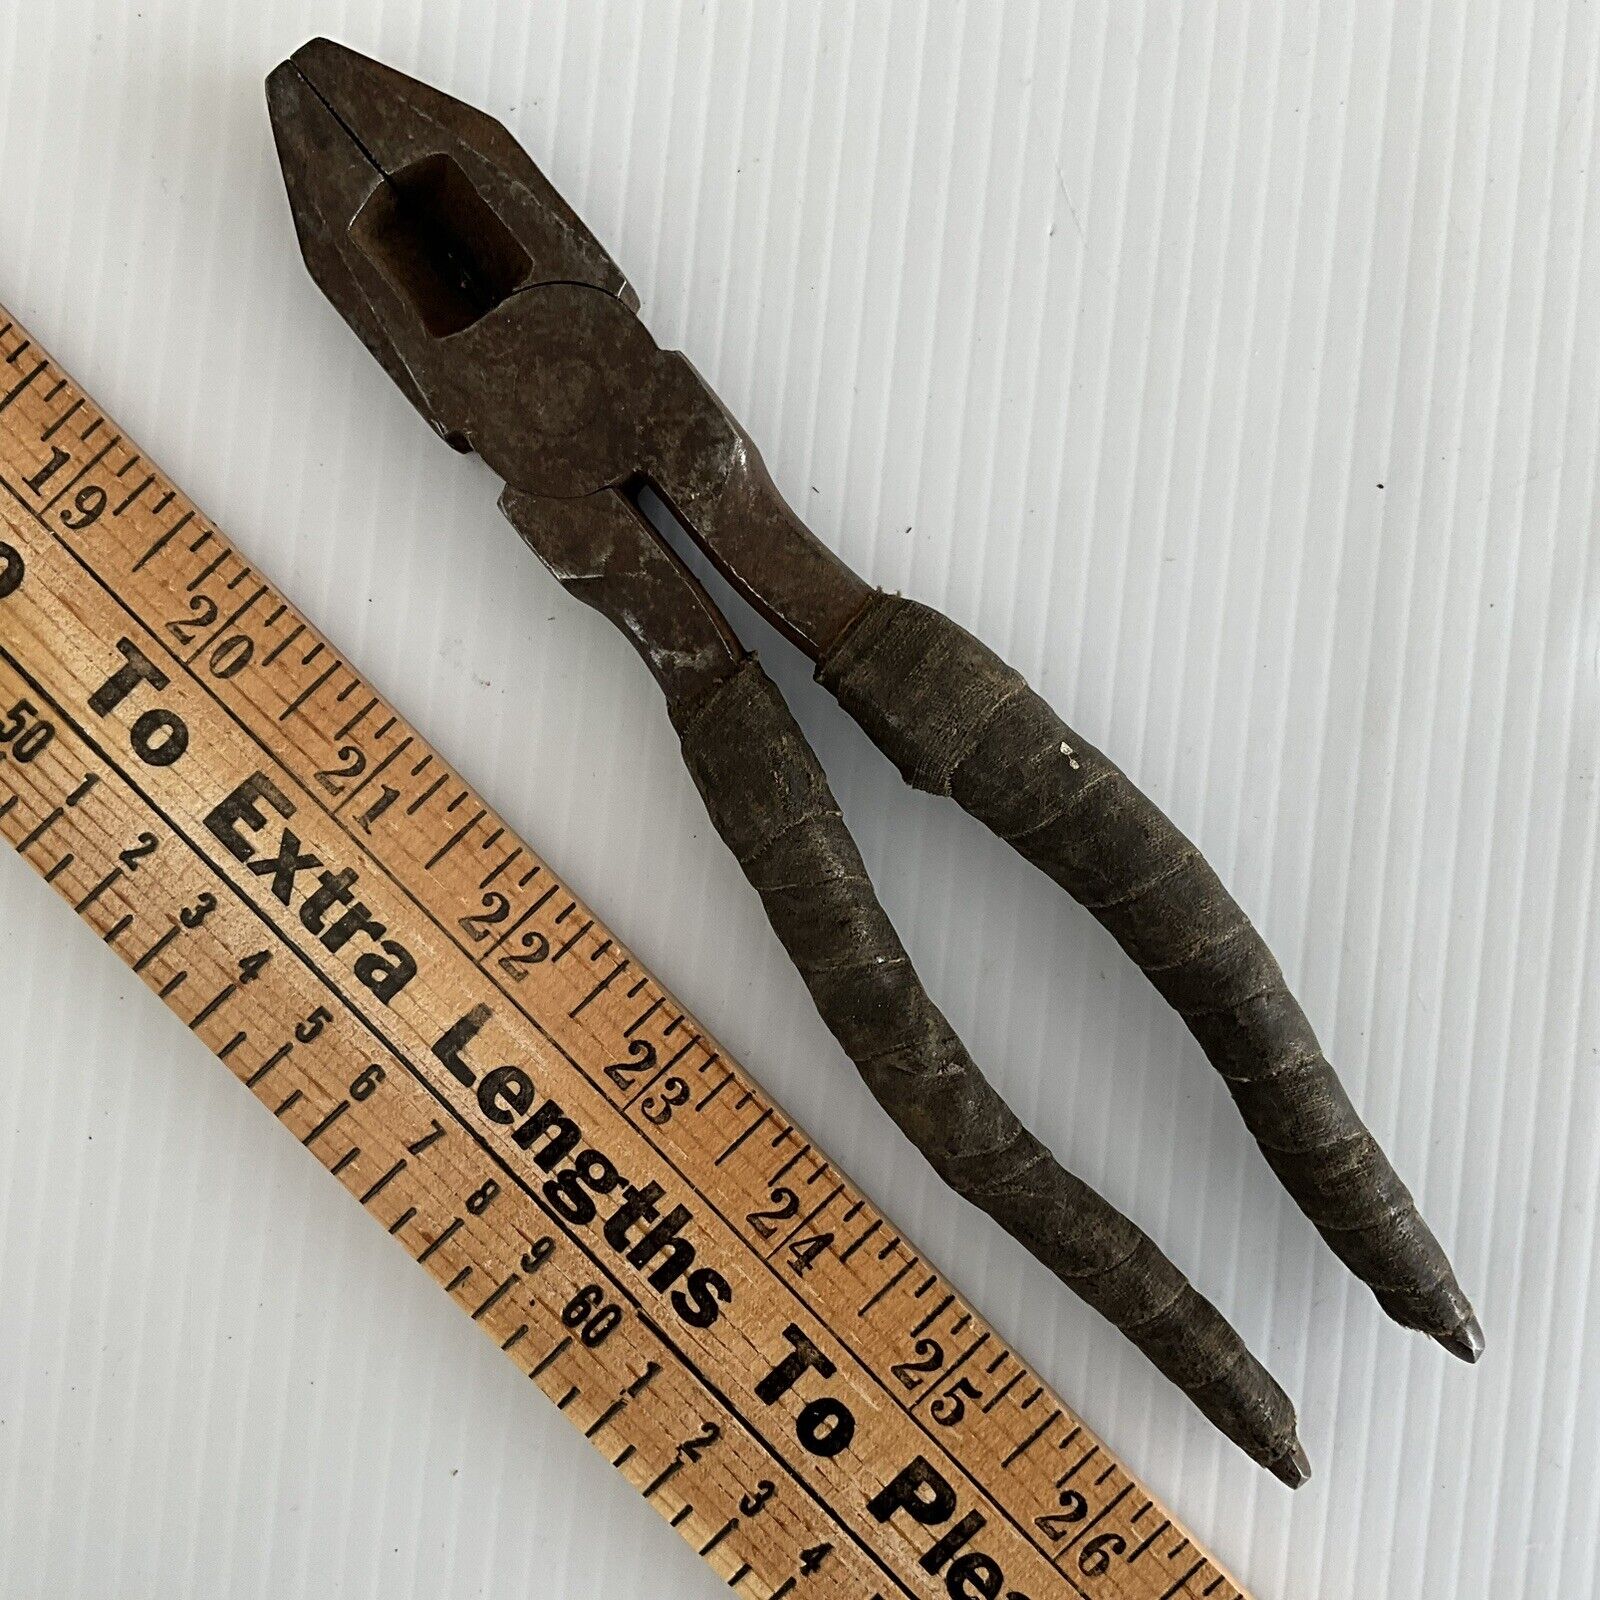 Vintage Fullers Lineman's Pliers, Drop Forged Steel Hand Made in England